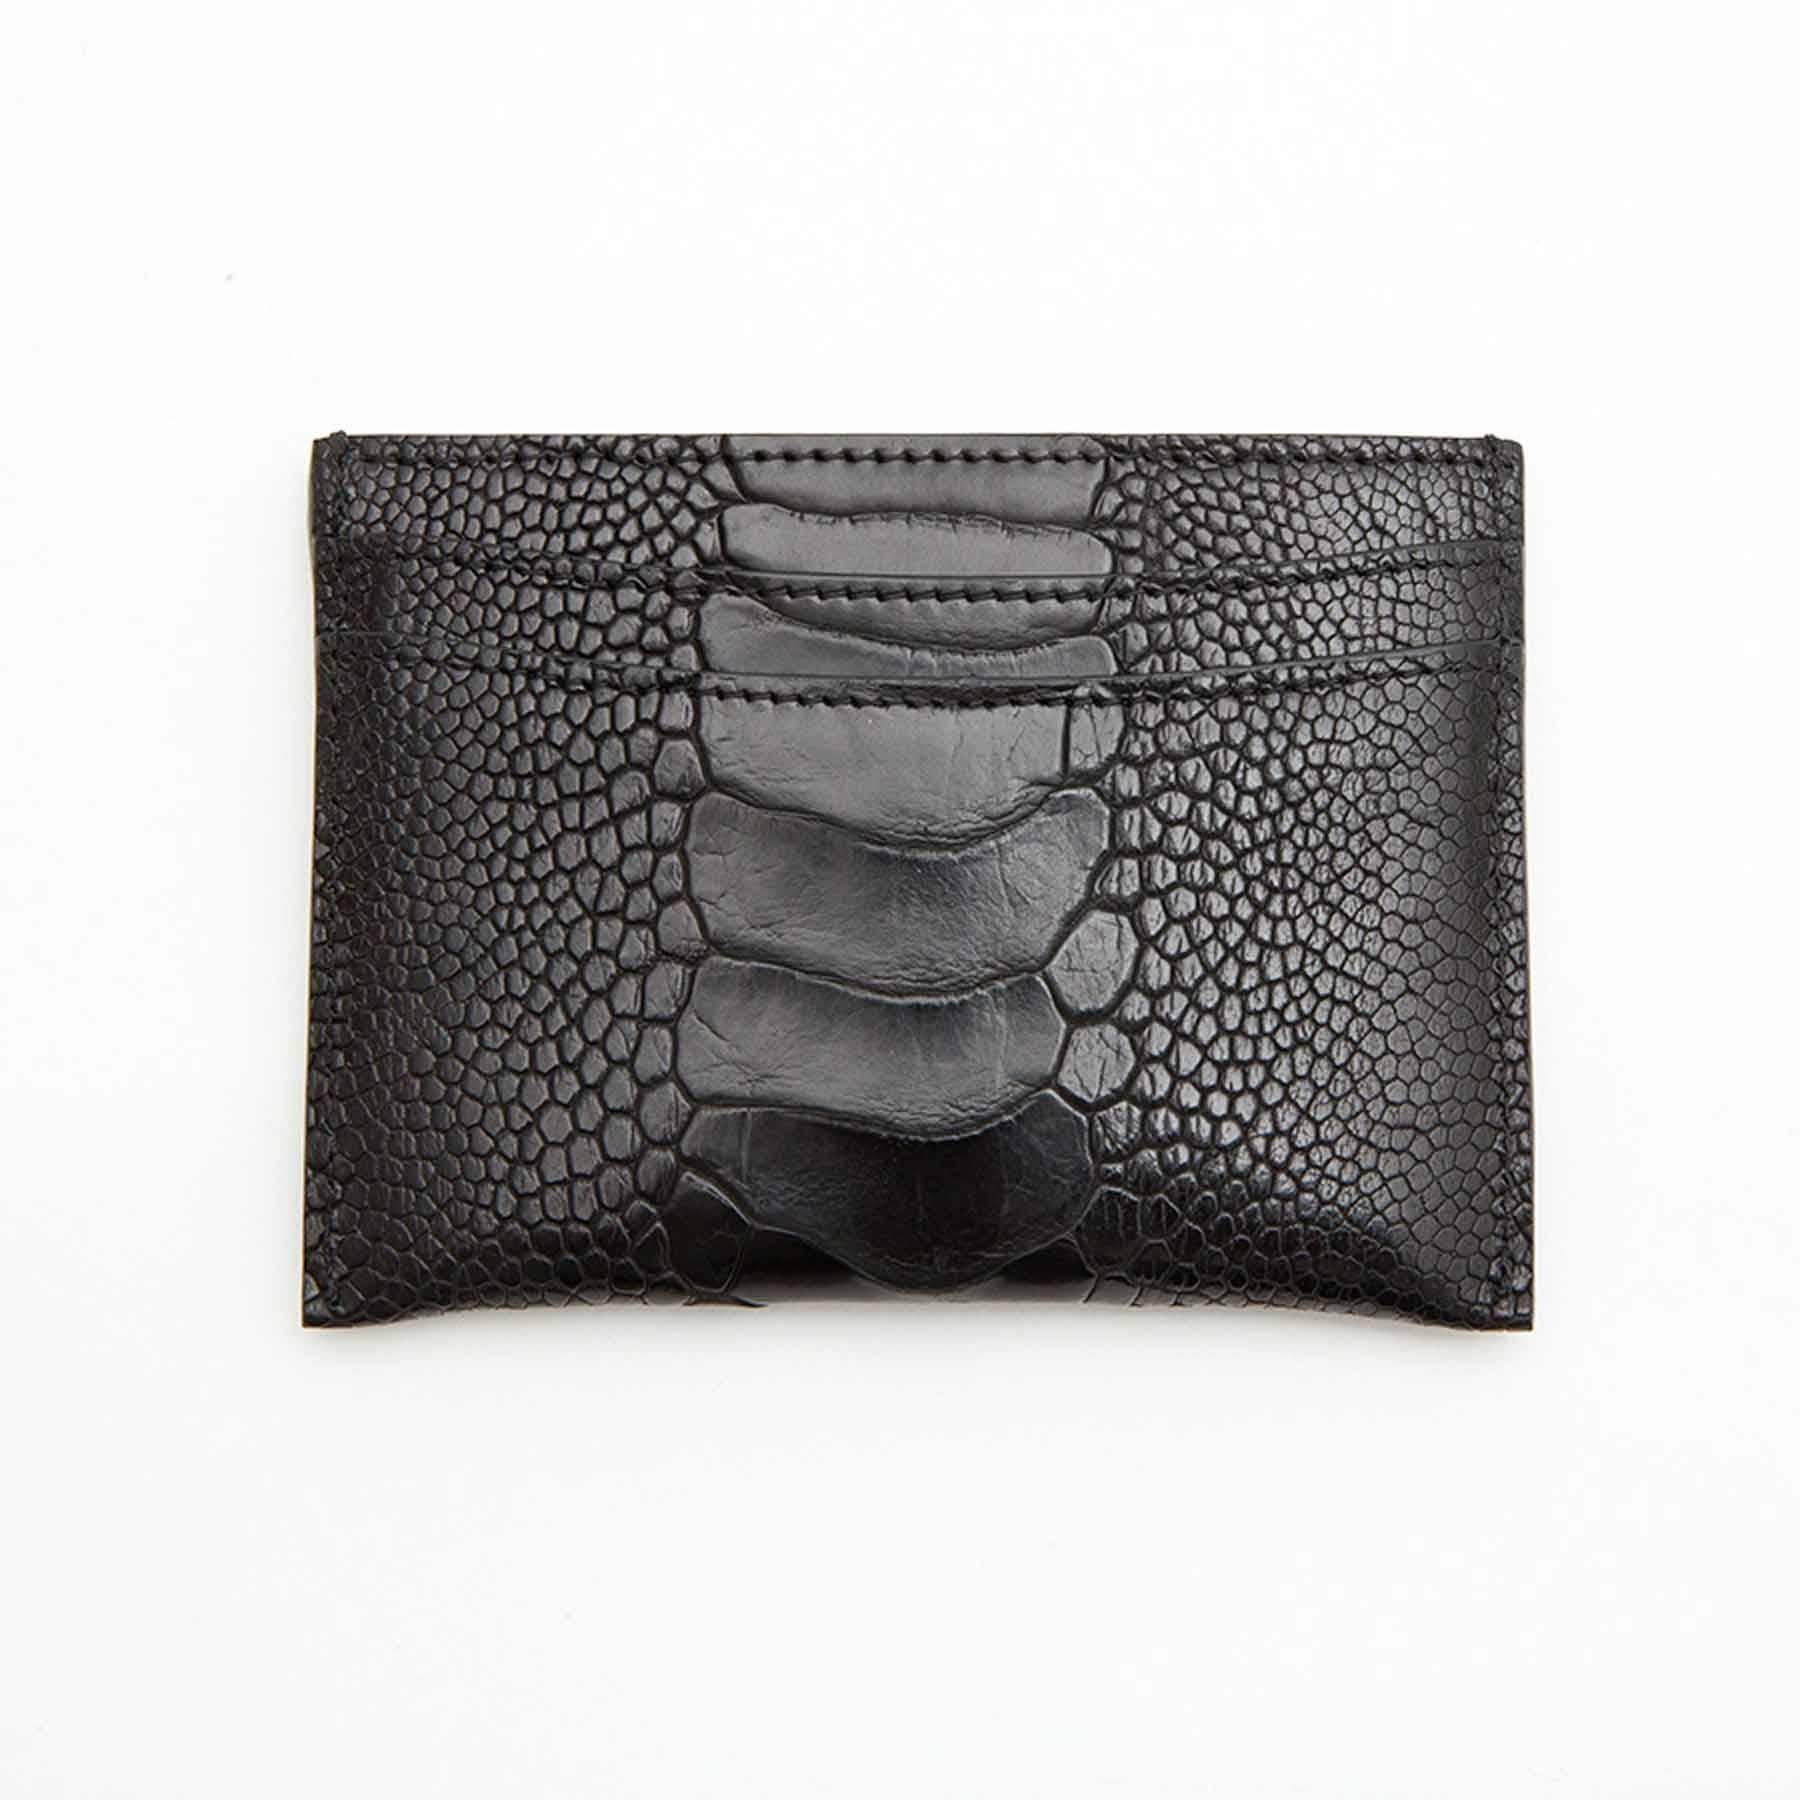 Chanel card holder in black ostrich leather. It has a 